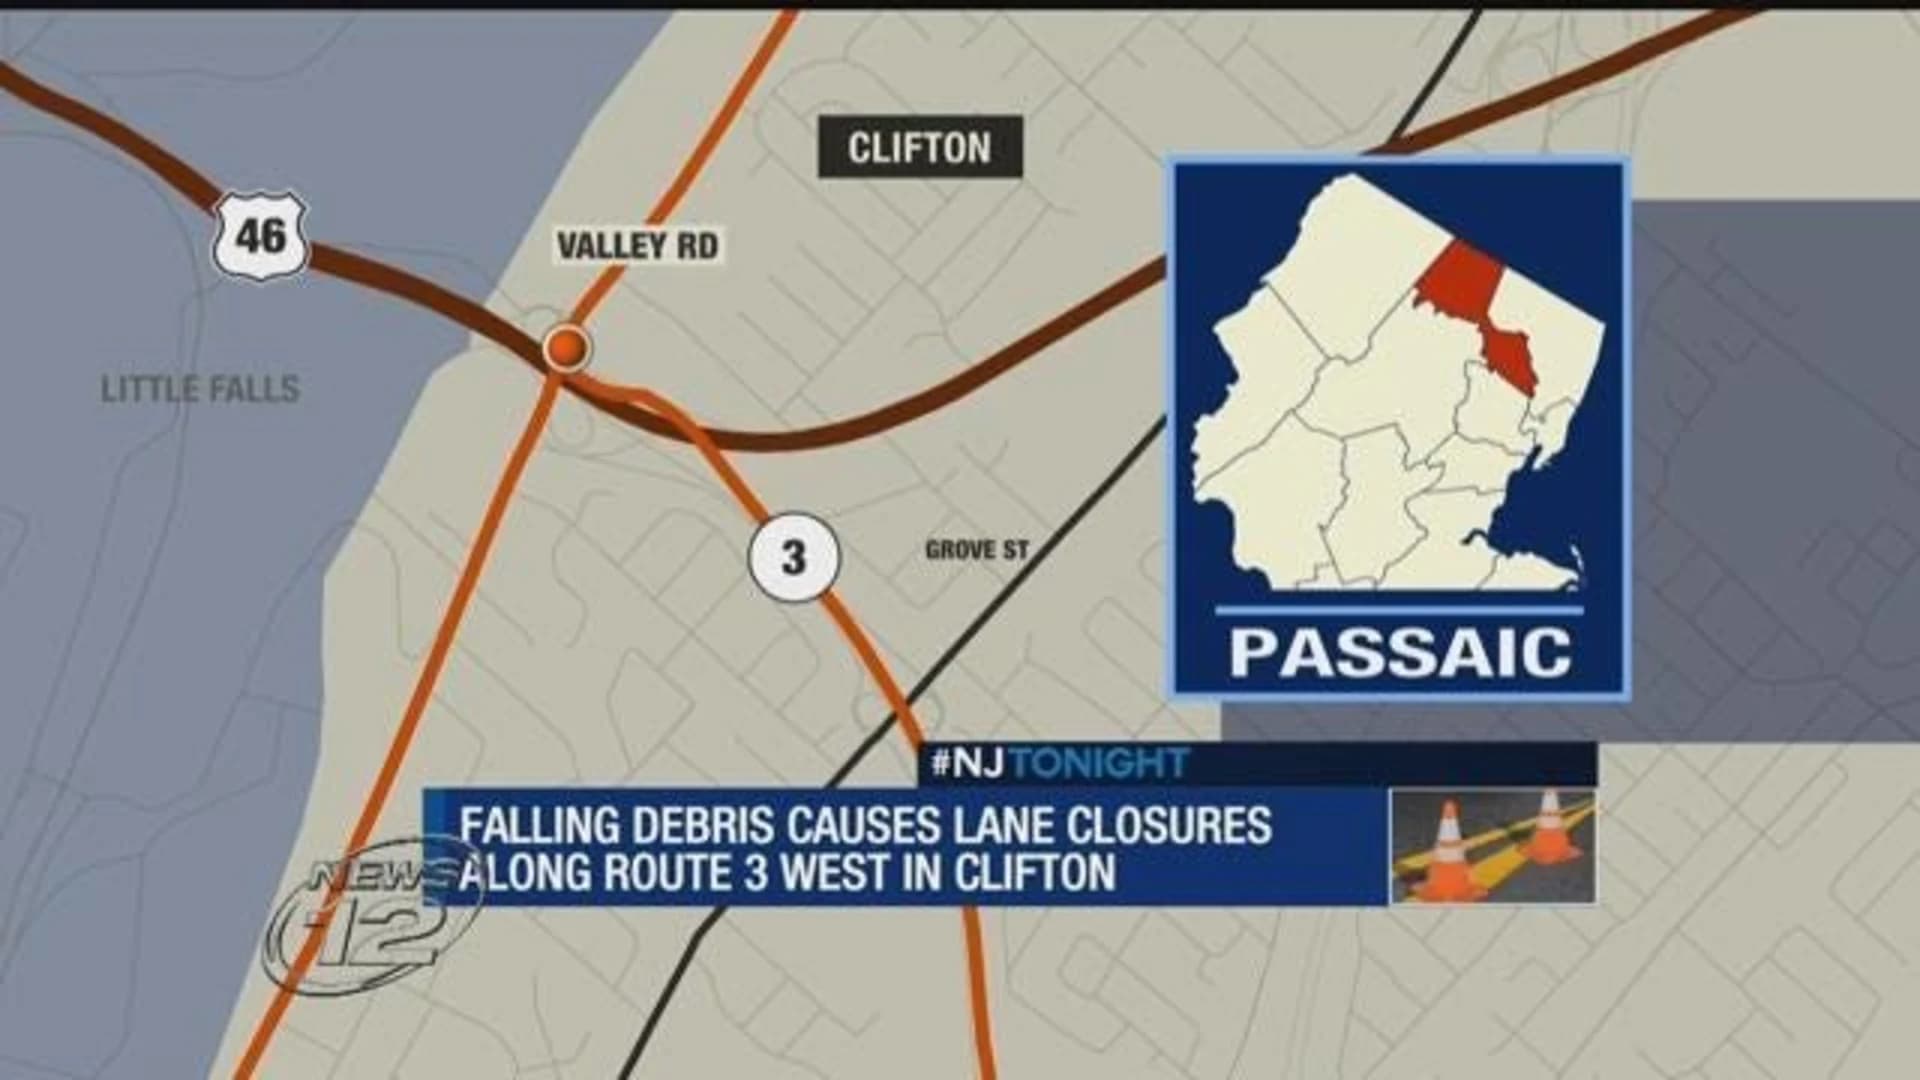 Falling debris closes parts of Route 3 in Clifton